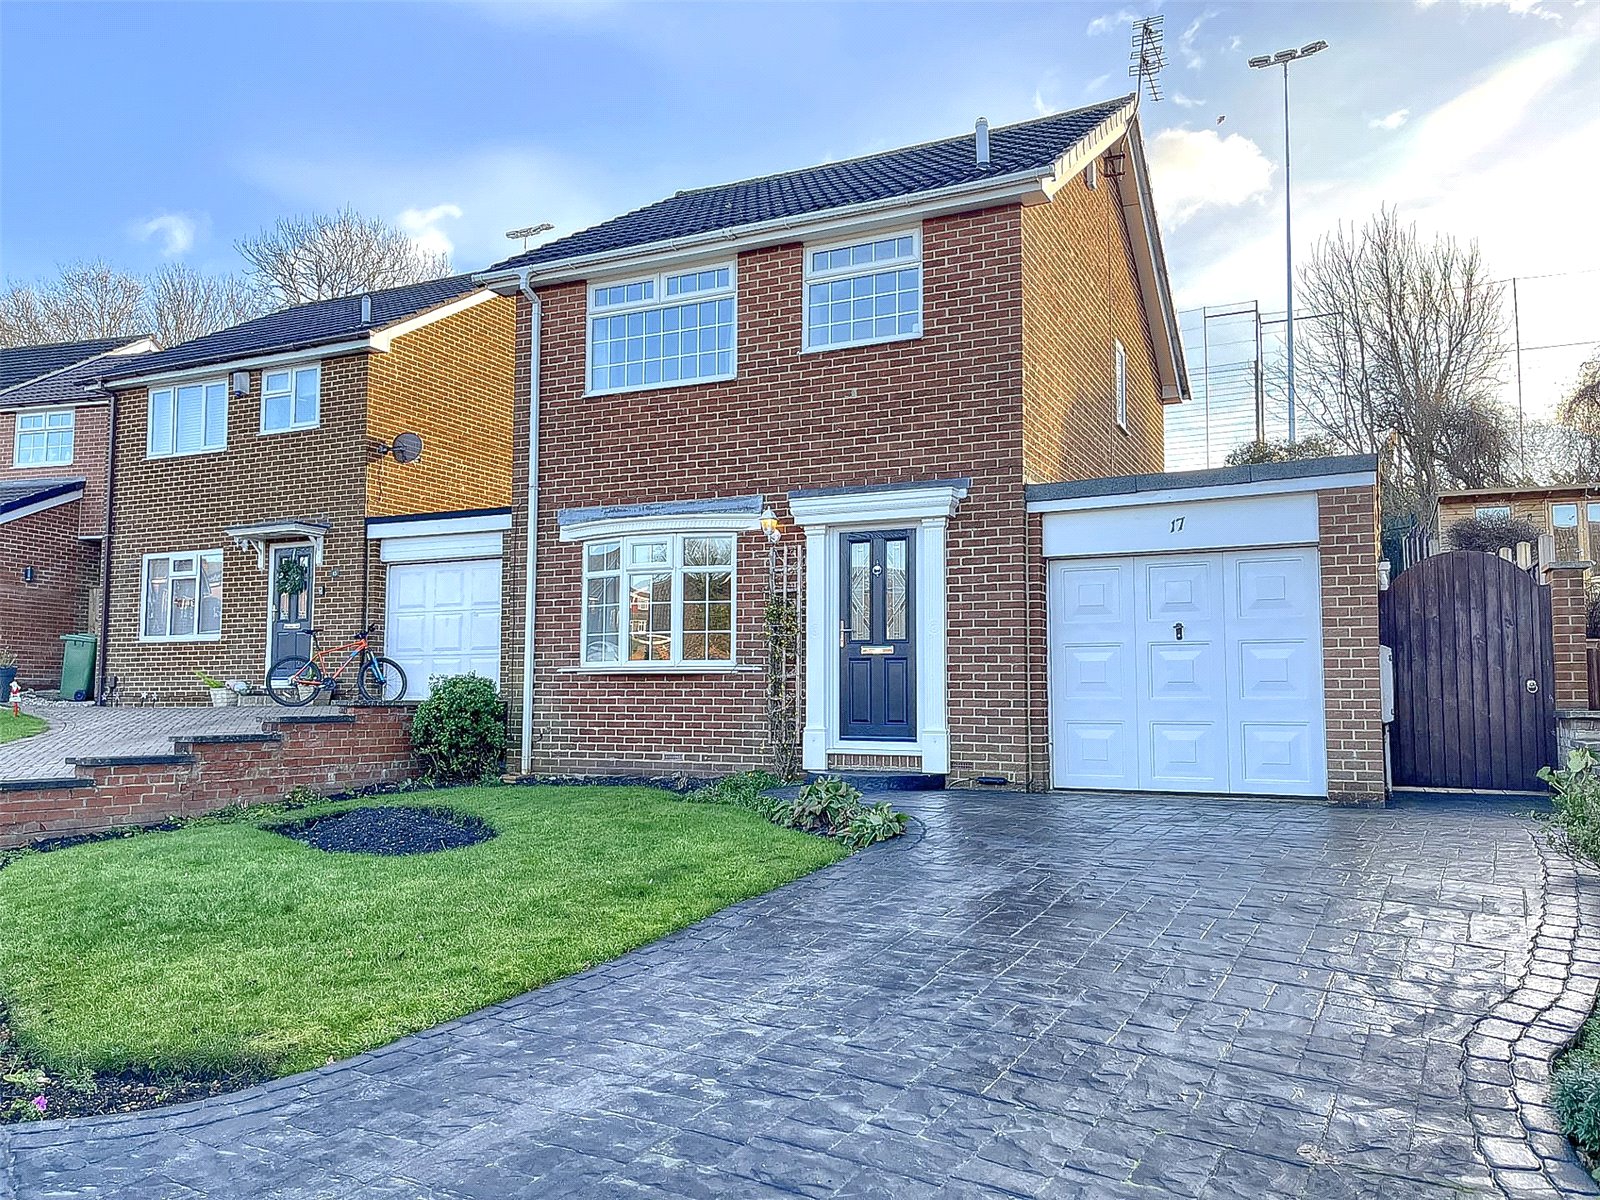 3 bed house for sale in Coatham Vale, Eaglescliffe - Property Image 1